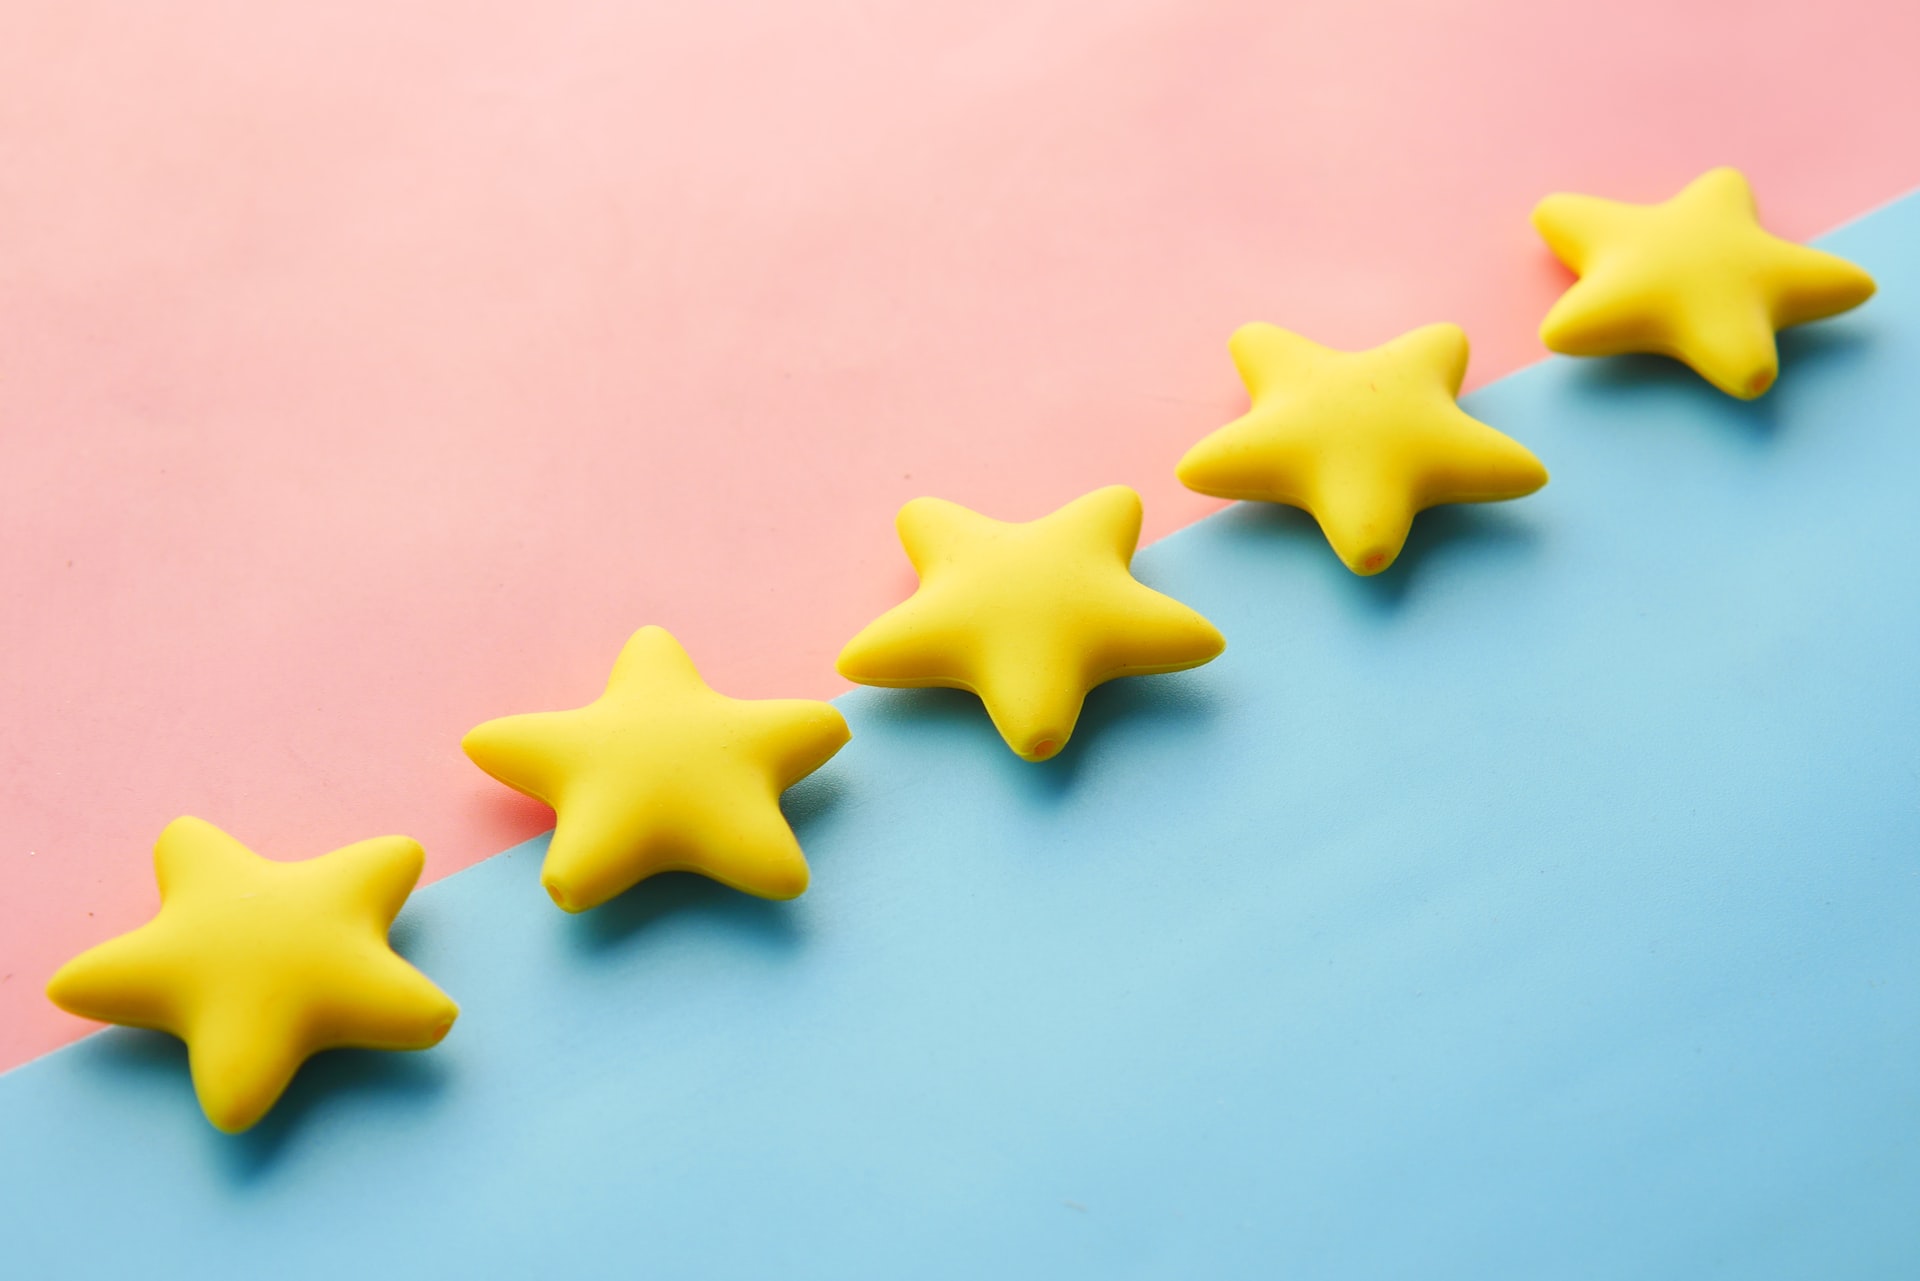 how to get more google reviews - 5 stars laid on pink and blue background